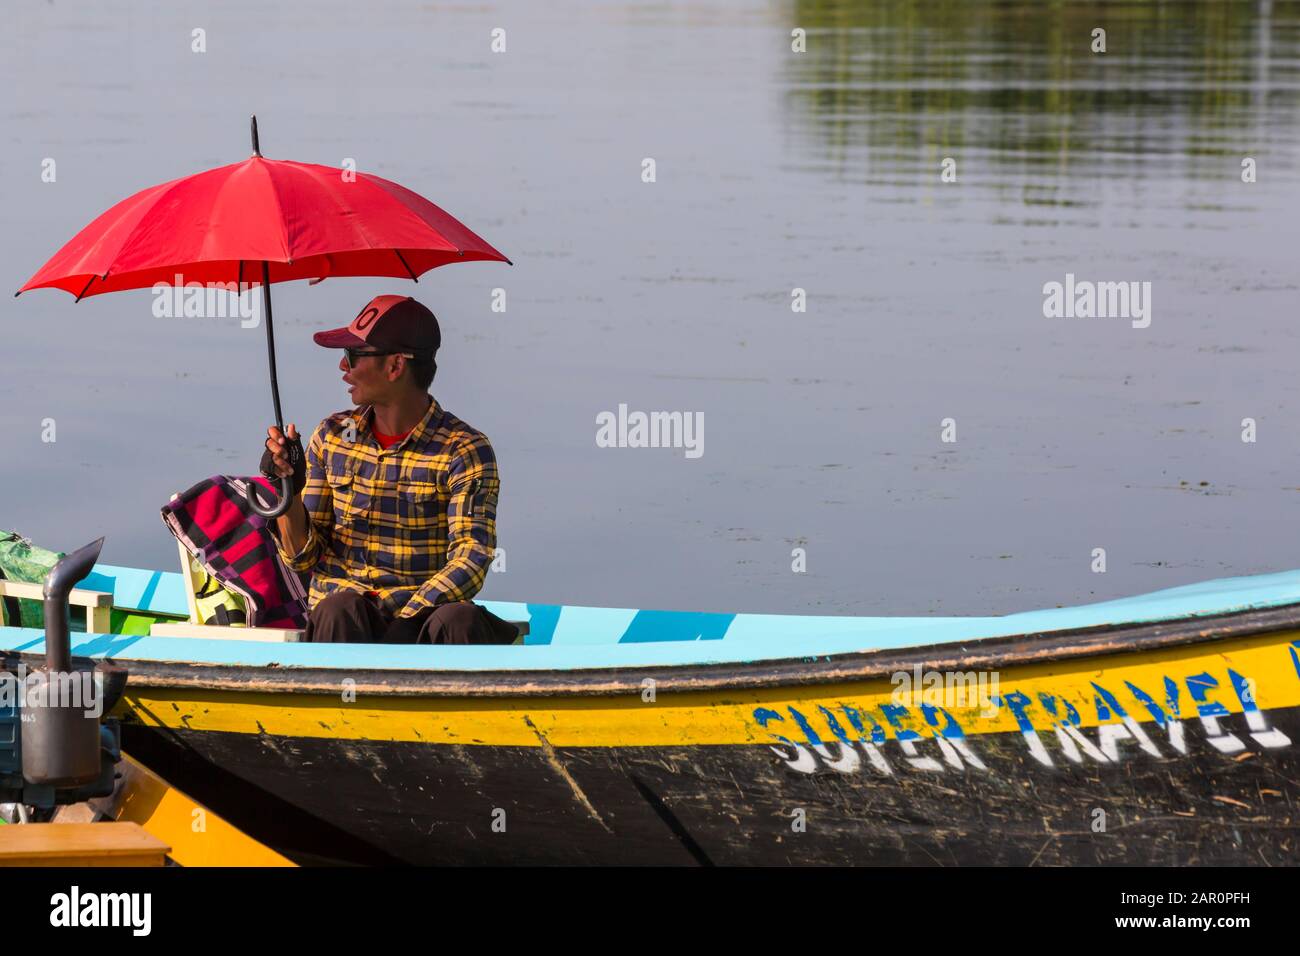 Page 3 Under A Red Umbrella High Resolution Stock Photography And Images Alamy